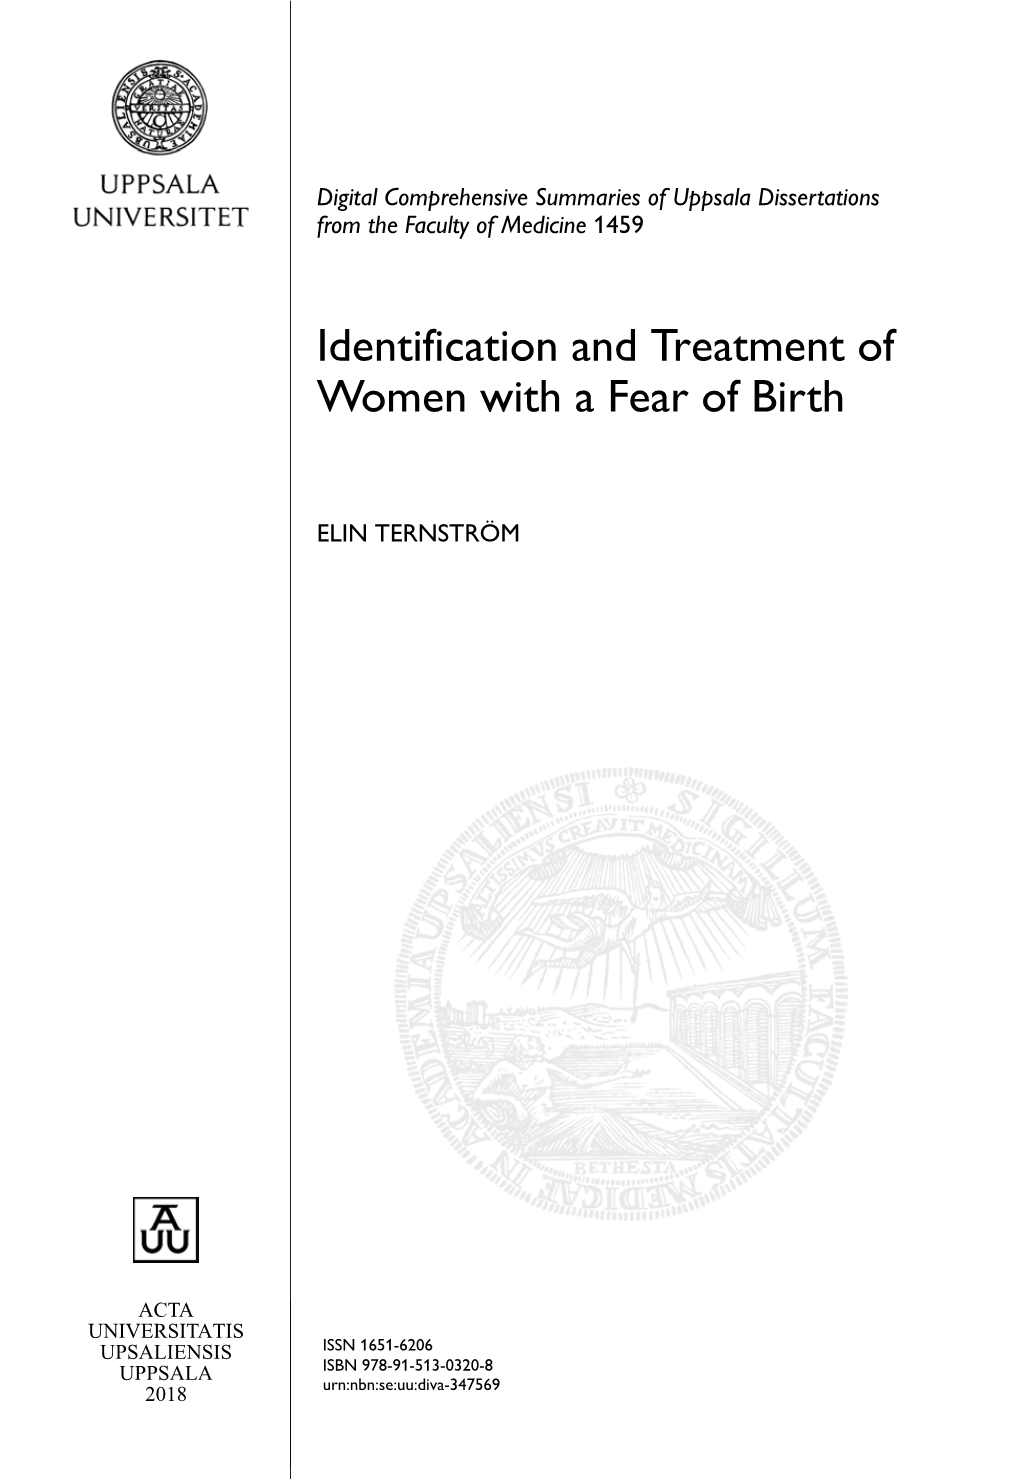 Identification and Treatment of Women with a Fear of Birth